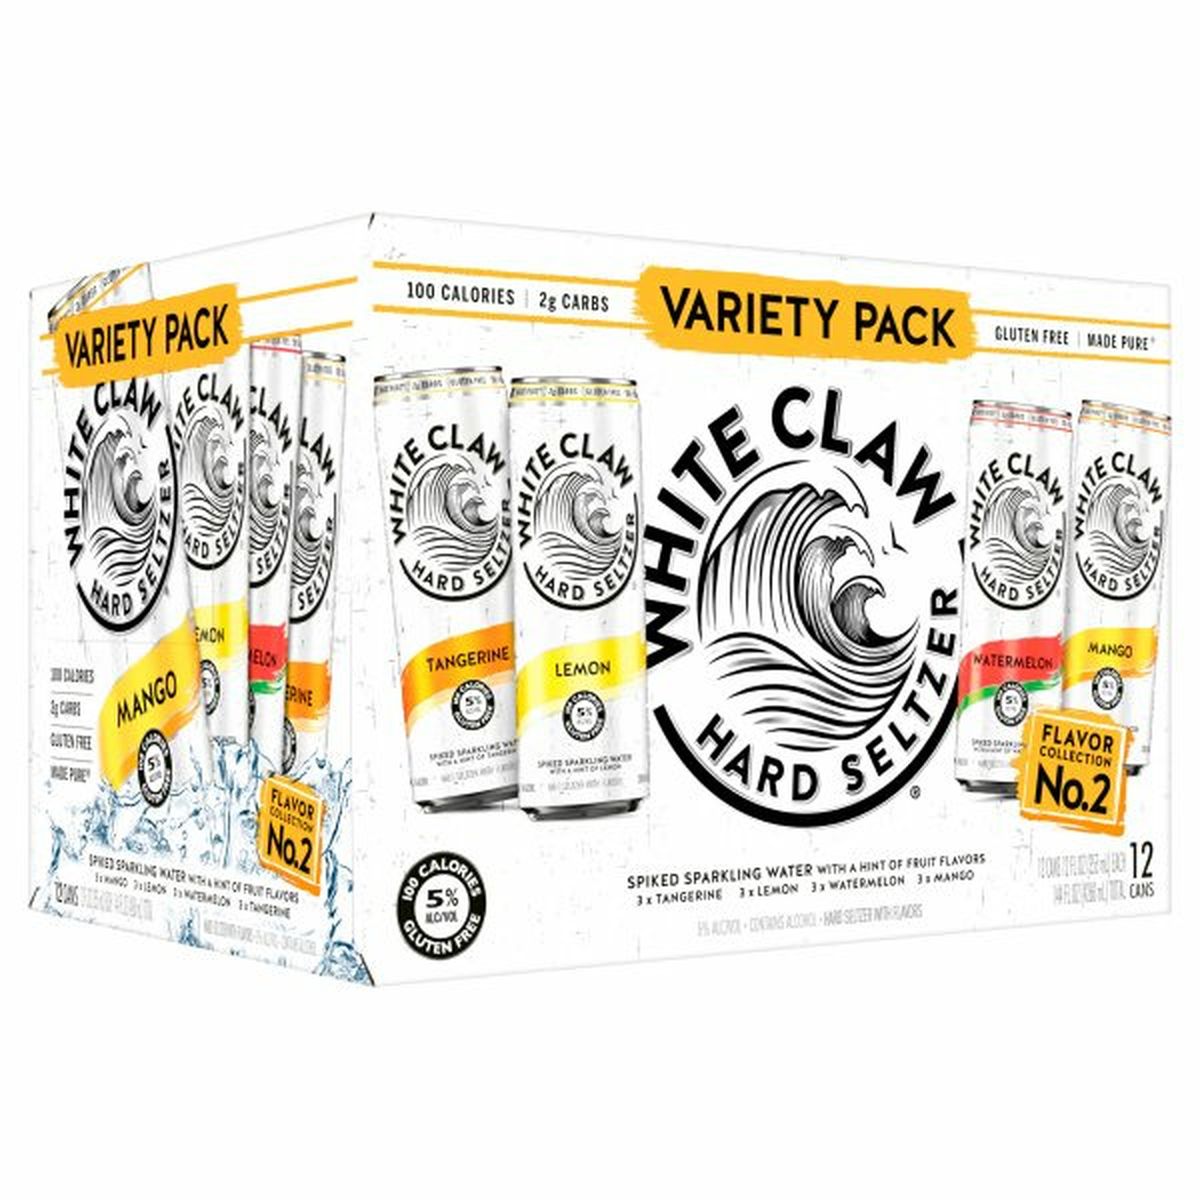 Calories in White Claw Hard Seltzer Variety Pack #2 12/12oz cans